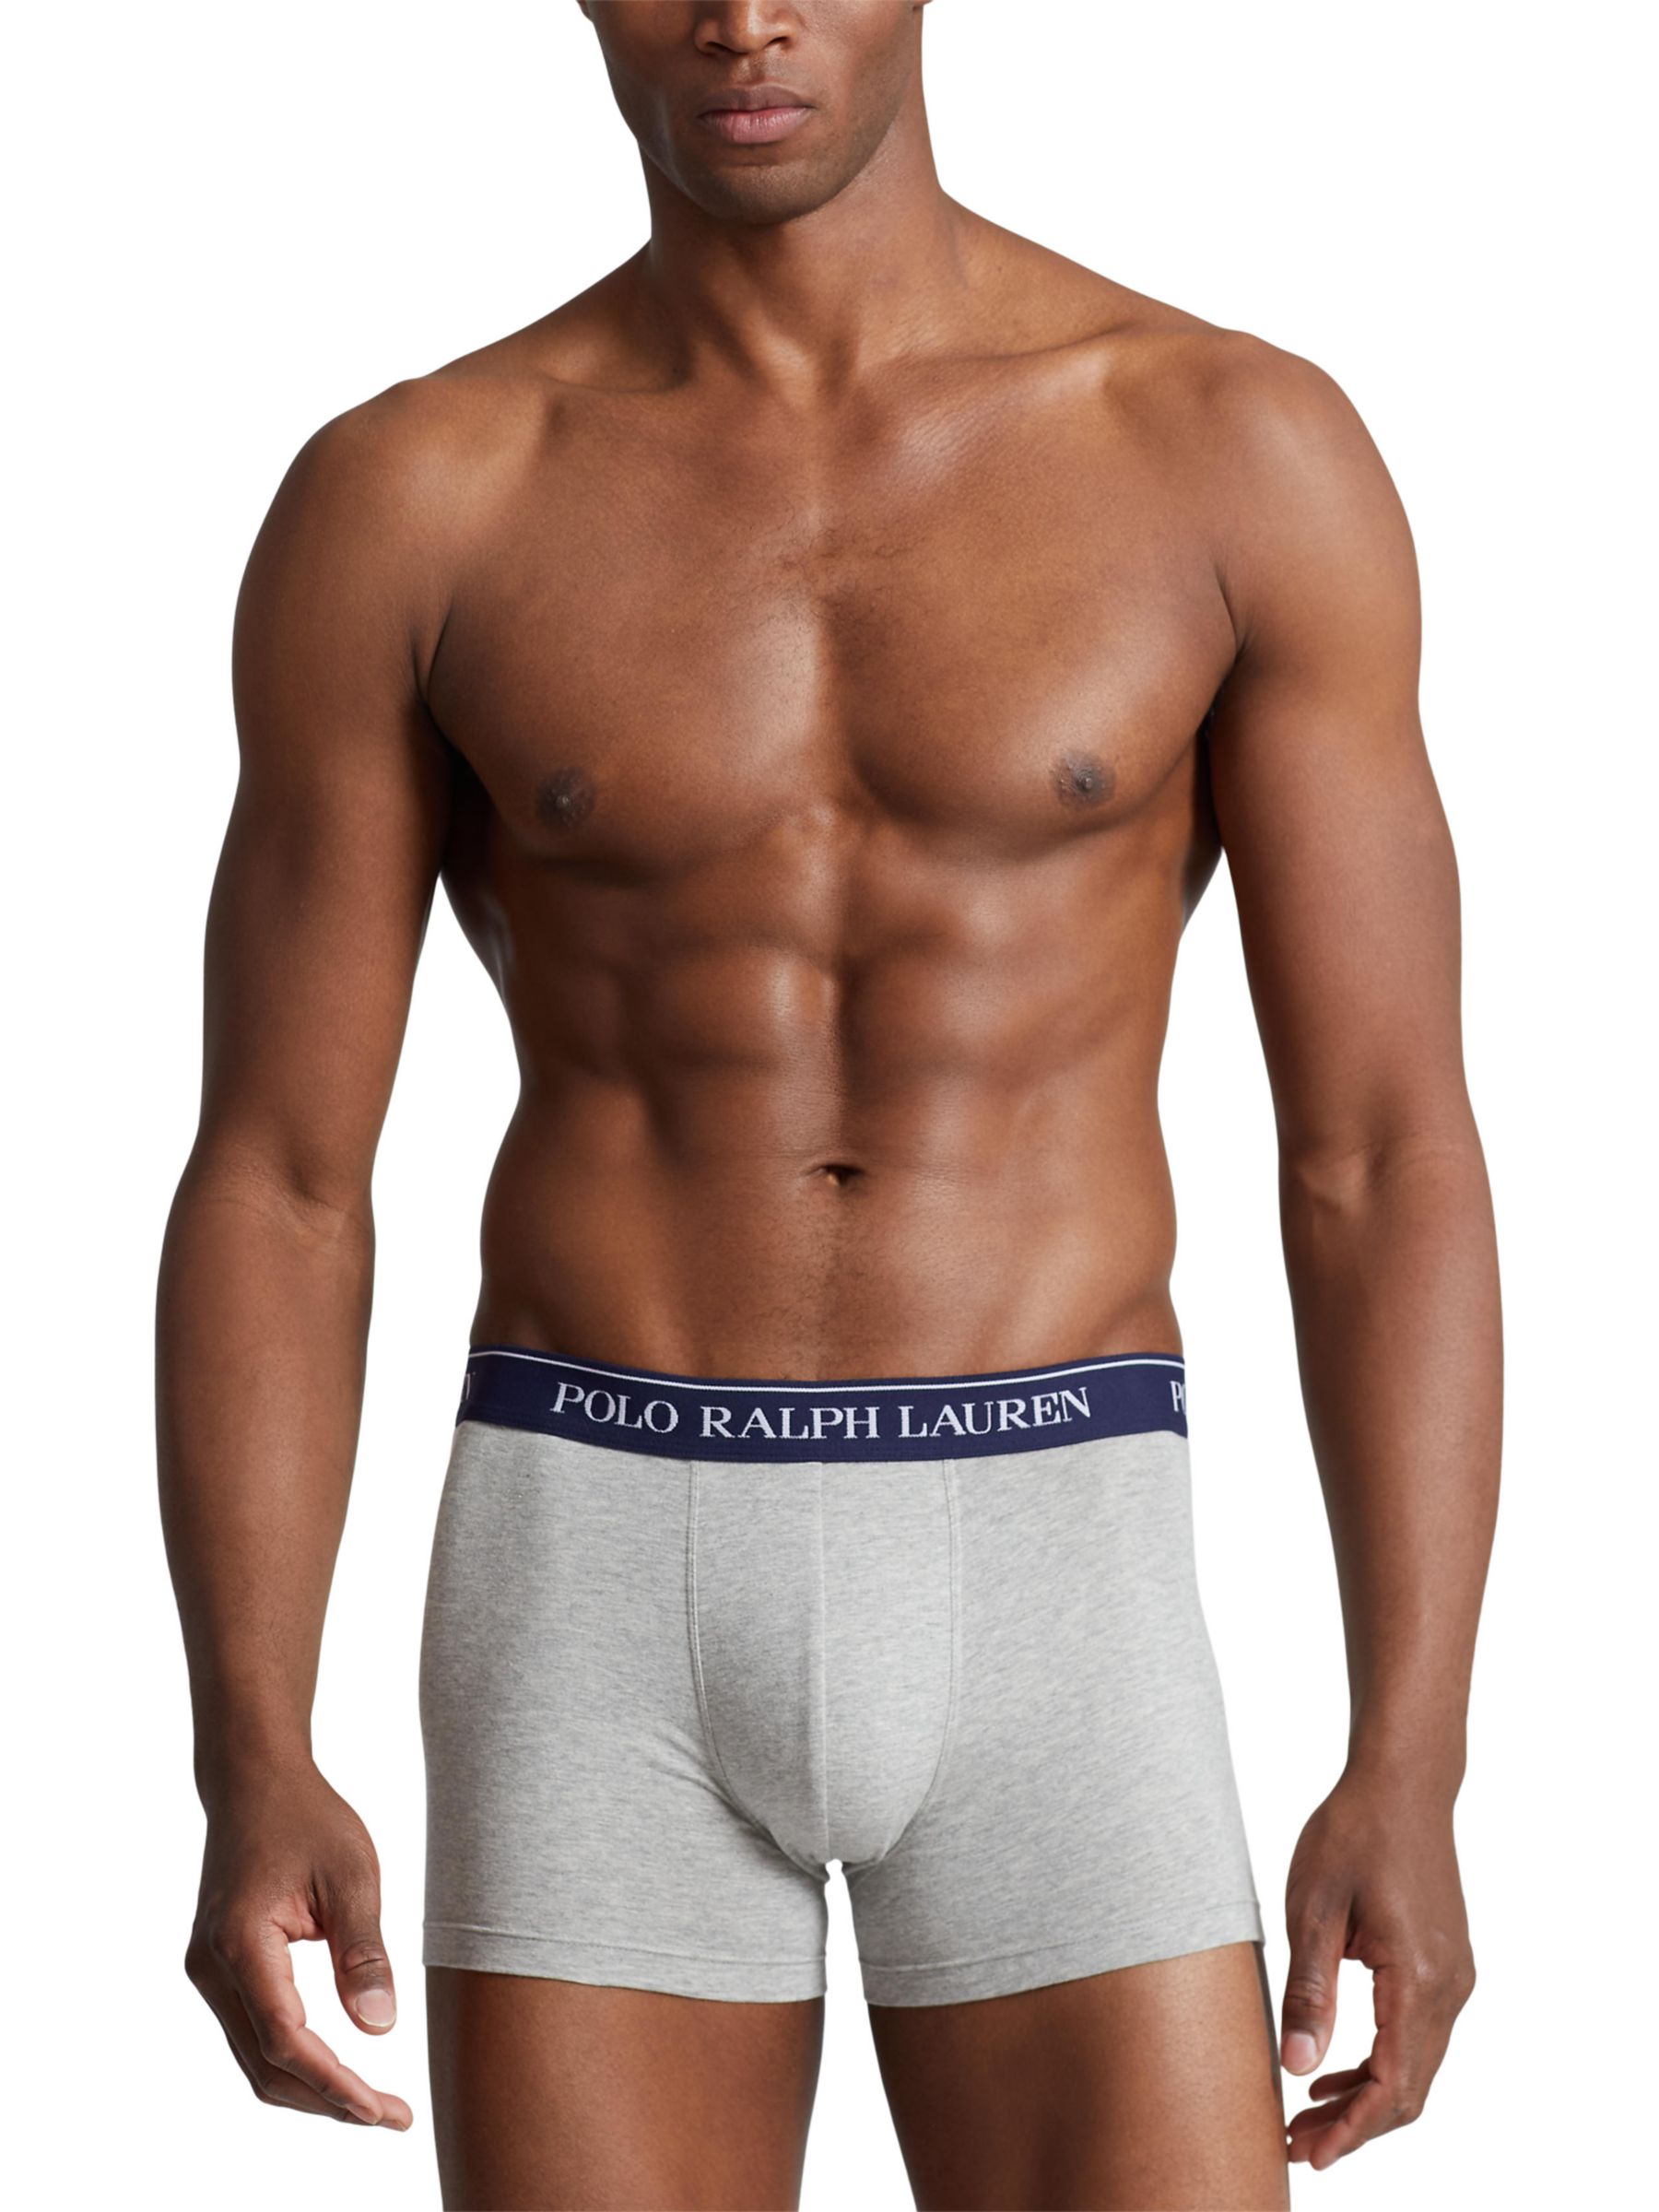 Buy Polo Ralph Lauren Cotton Stretch Trunks, Pack of 5, Blue/Grey/Red Multi Online at johnlewis.com